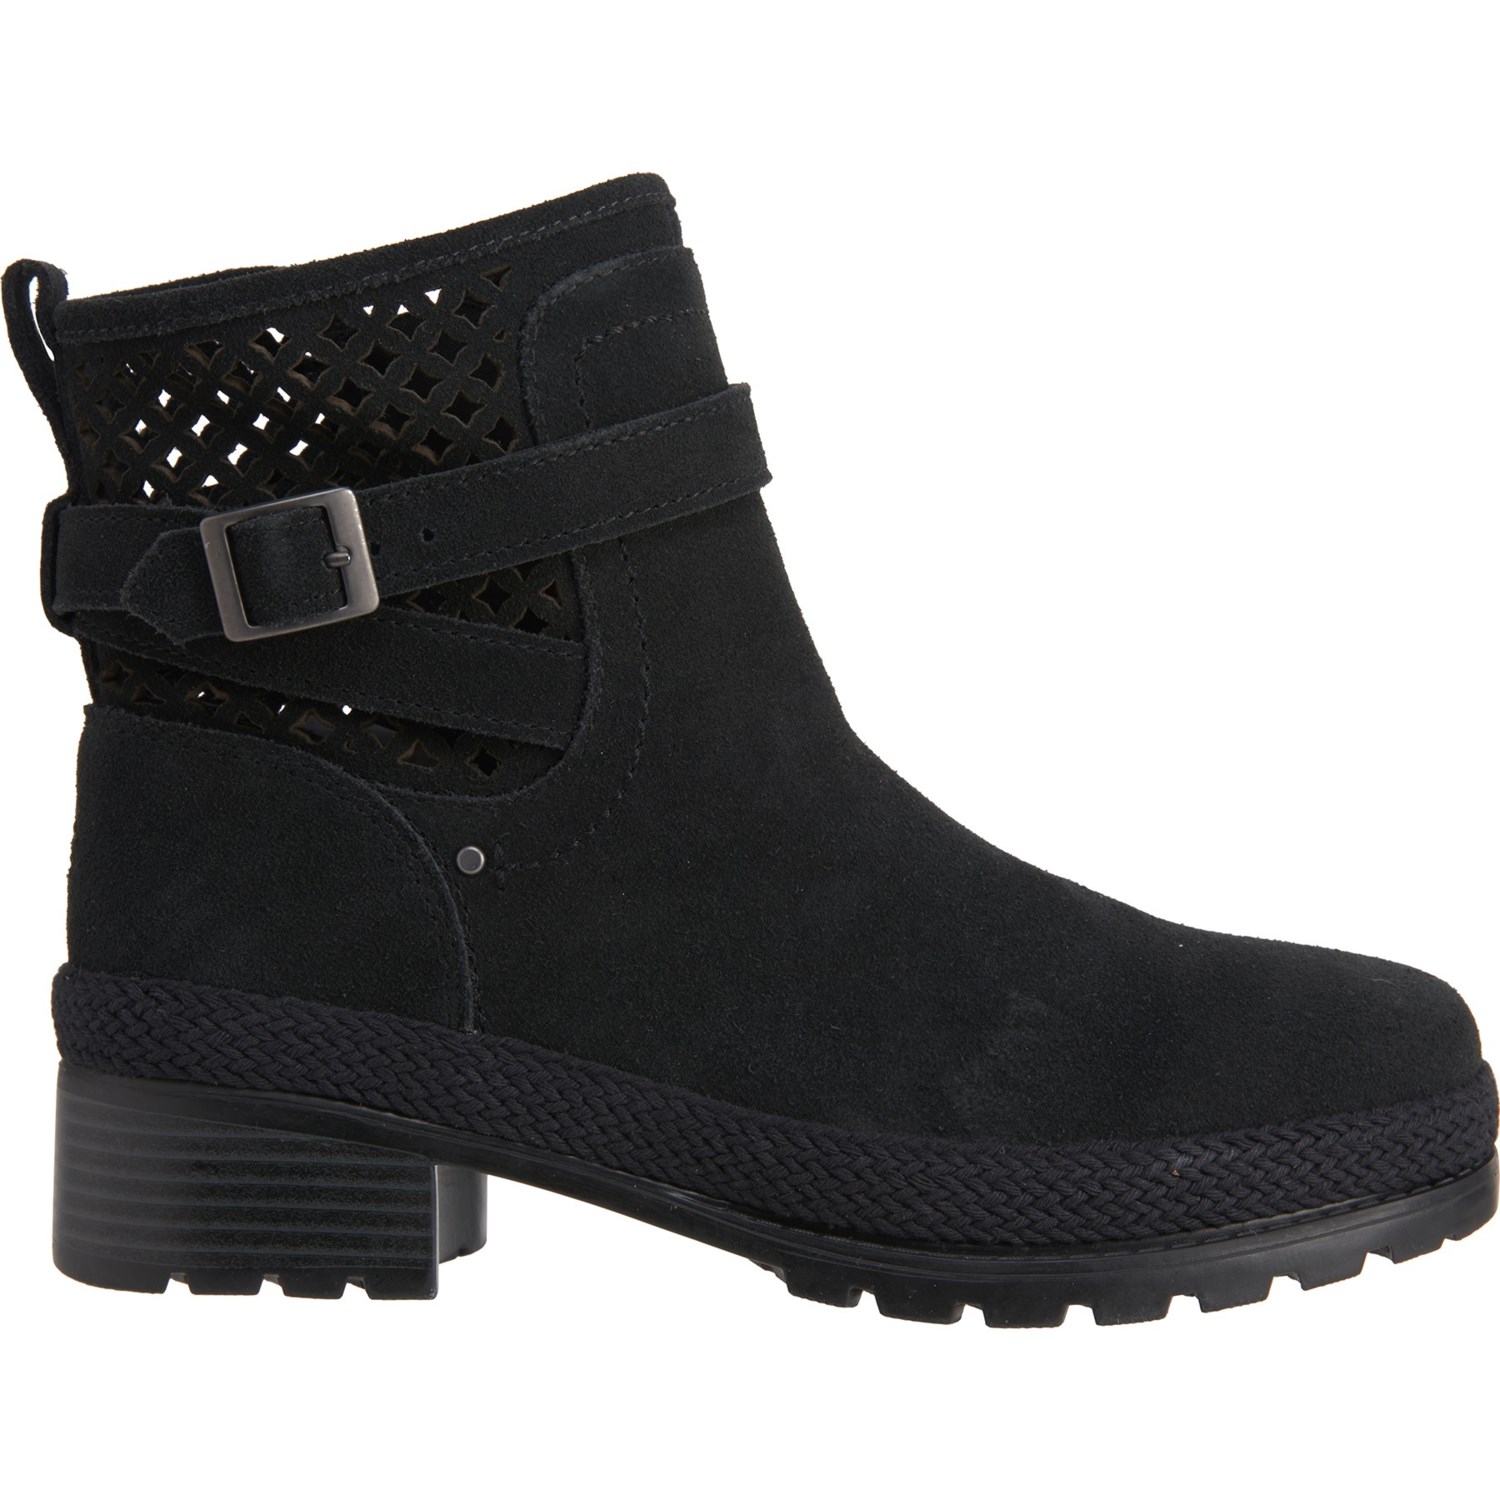 Muck Boot Company Liberty Ankle Boots (For Women) - Save 67%